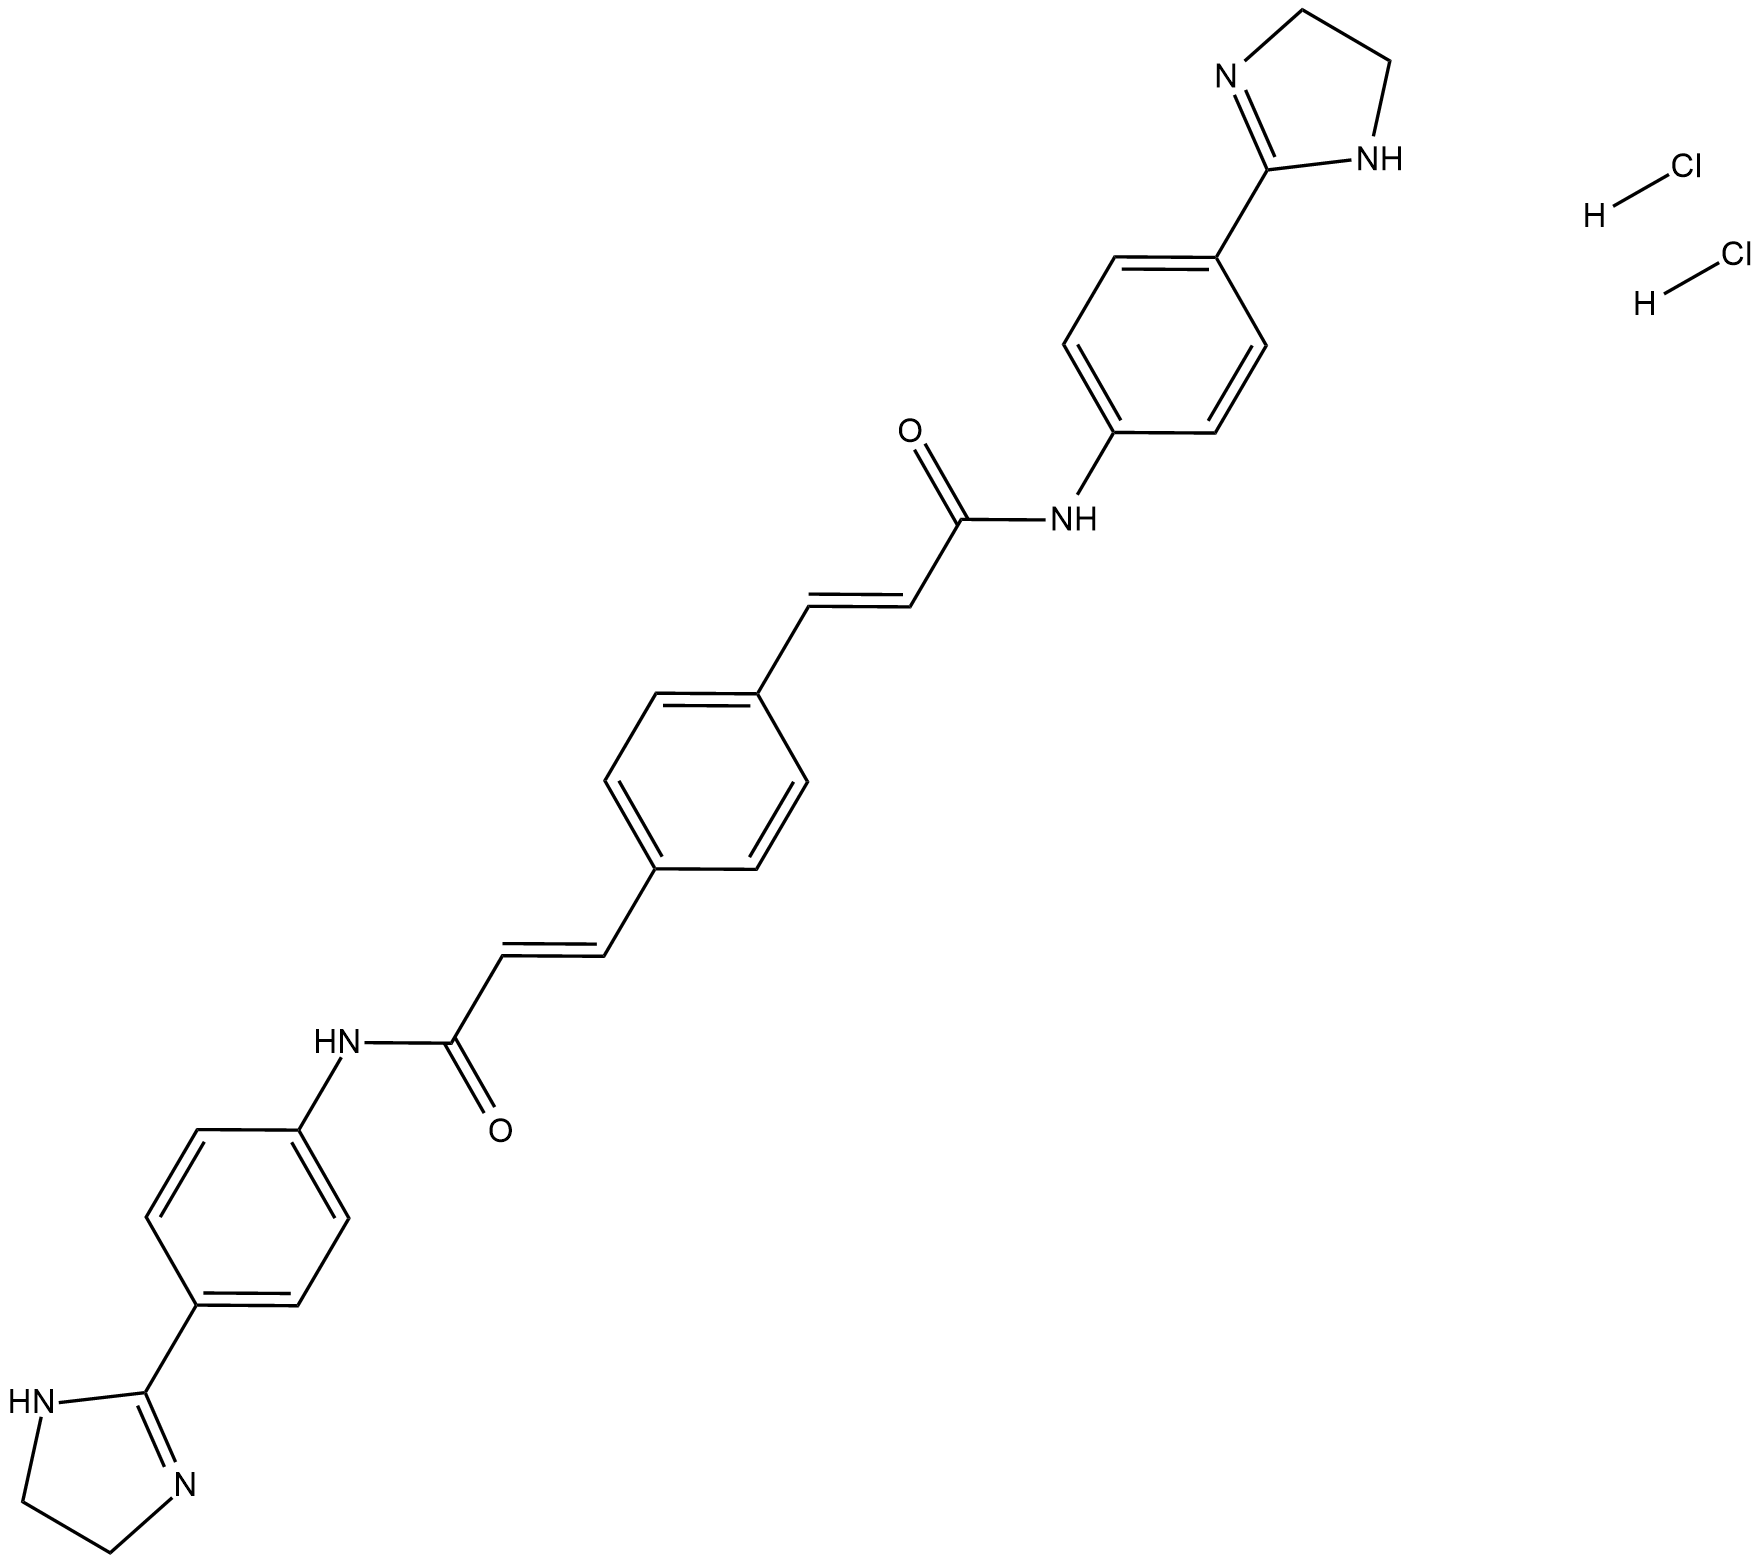 GW4869 Chemical Structure